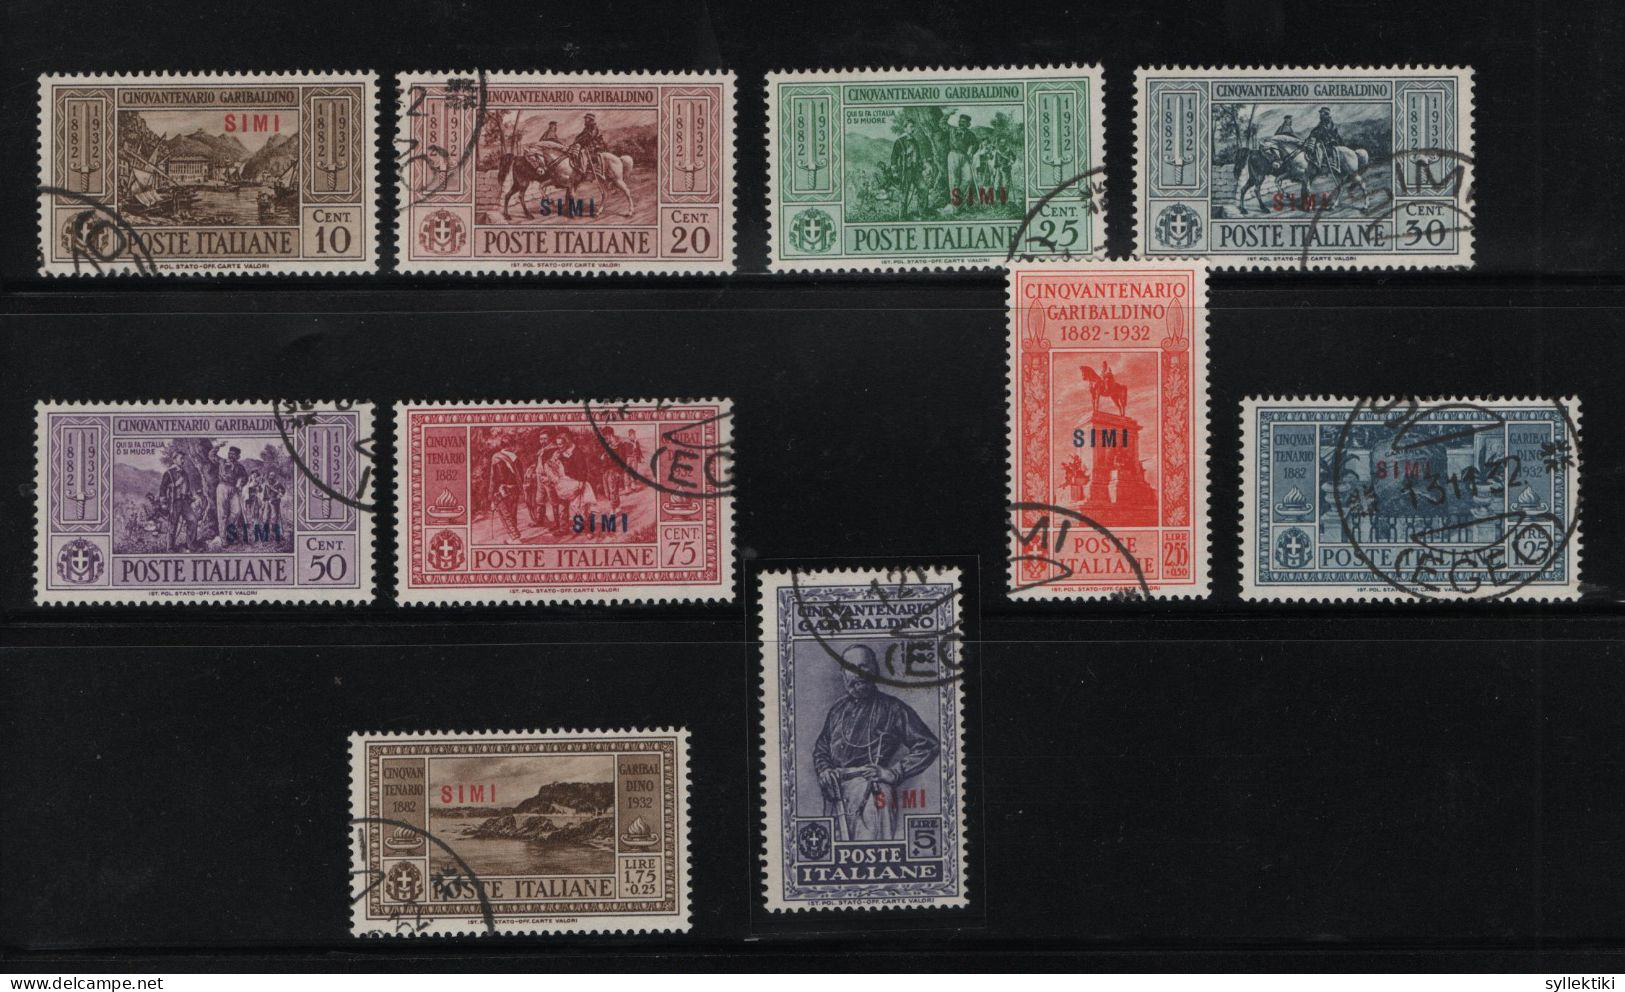 GREECE 1932 DODECANESE GARIBALDI ISSUE SIMI OVERPRINT COMPLETE SET USED STAMPS   HELLAS No 108XIII - 117XIII AND VALUE - Dodecanese